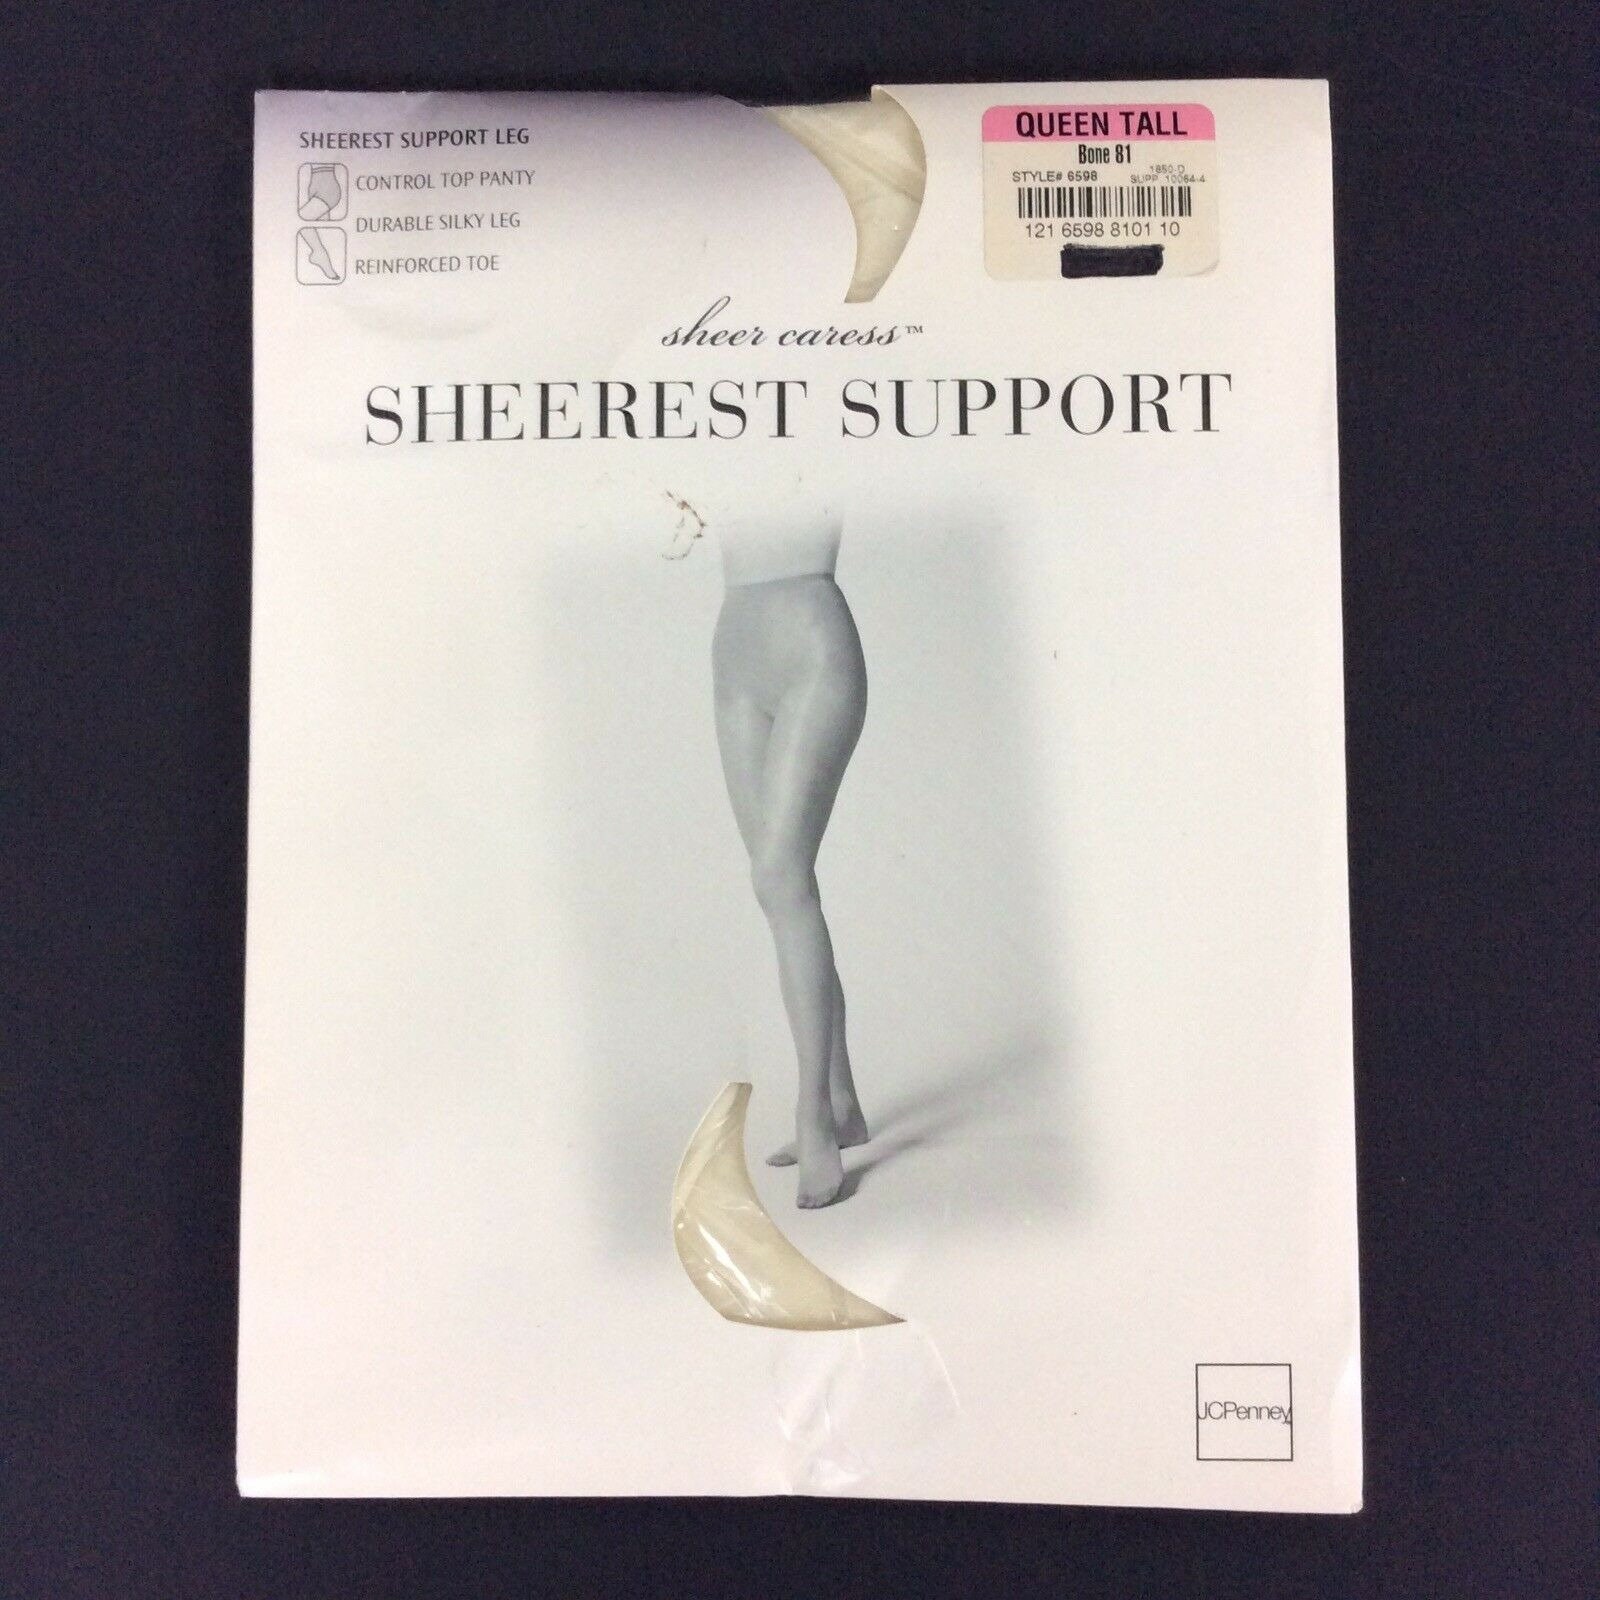 Jcpenney Sheer Caress Support Pantyhose Queen Tall Bone Ivory